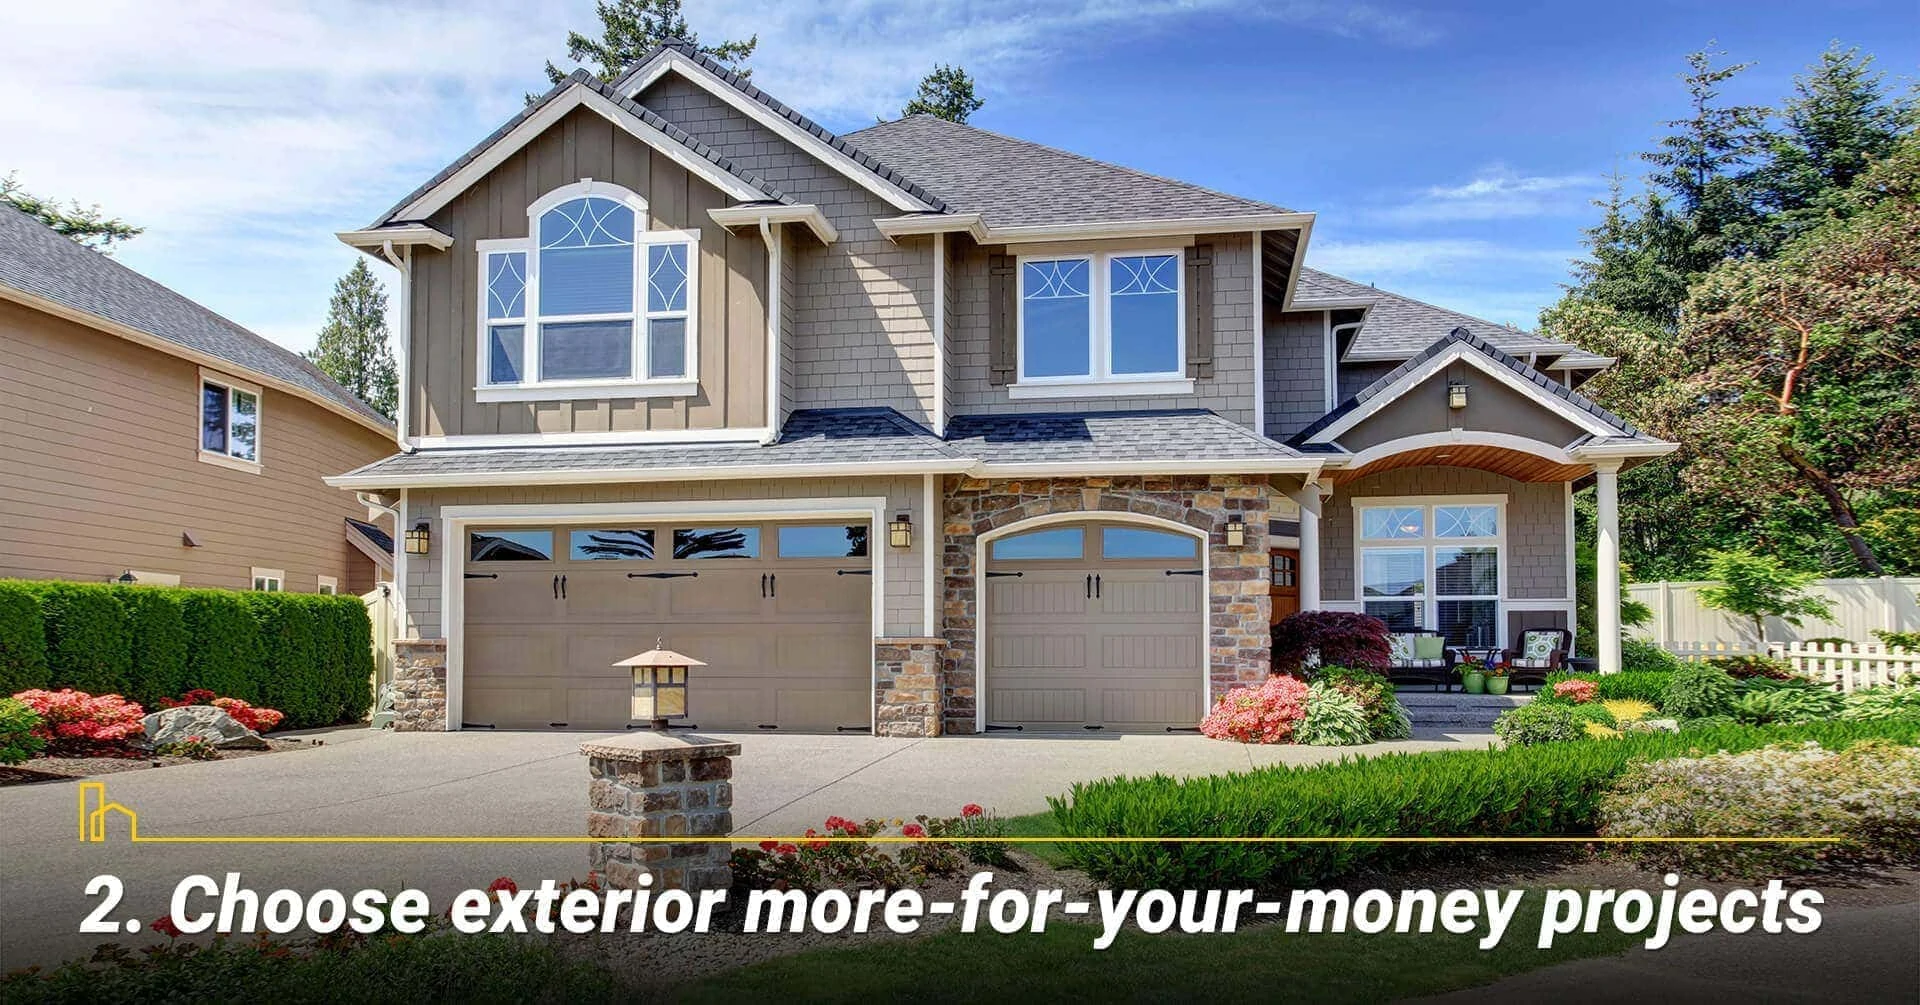 Choose exterior more-for-your-money projects, improve your exterior for higher price